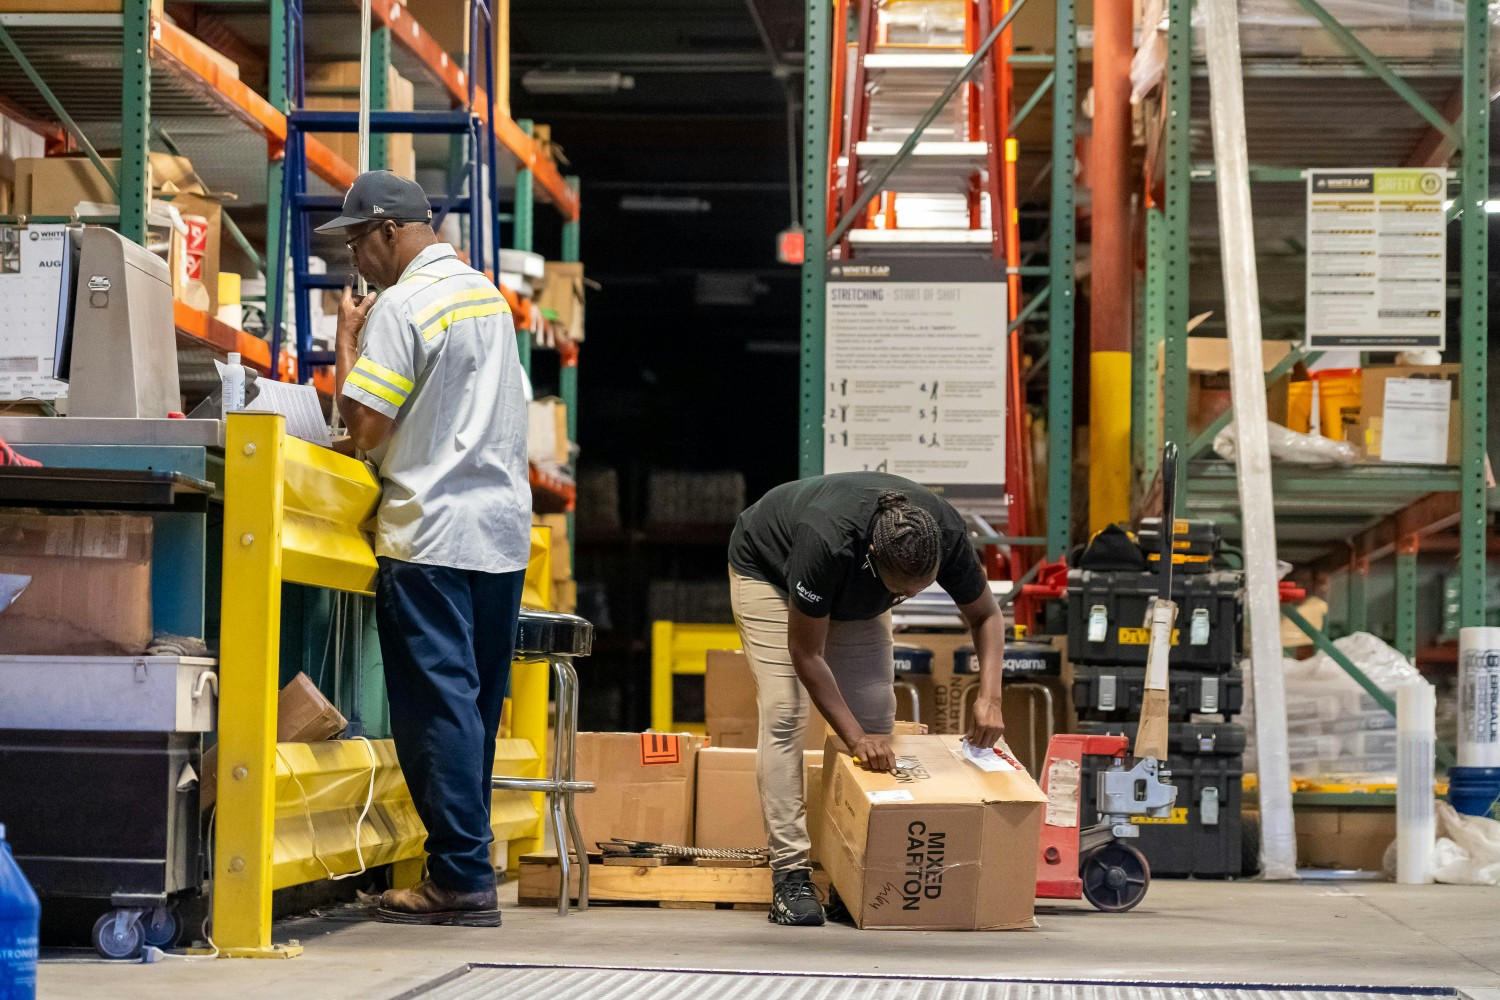 Our operations team works together at our warehouses to ensure our customers have all the products they need in stock.